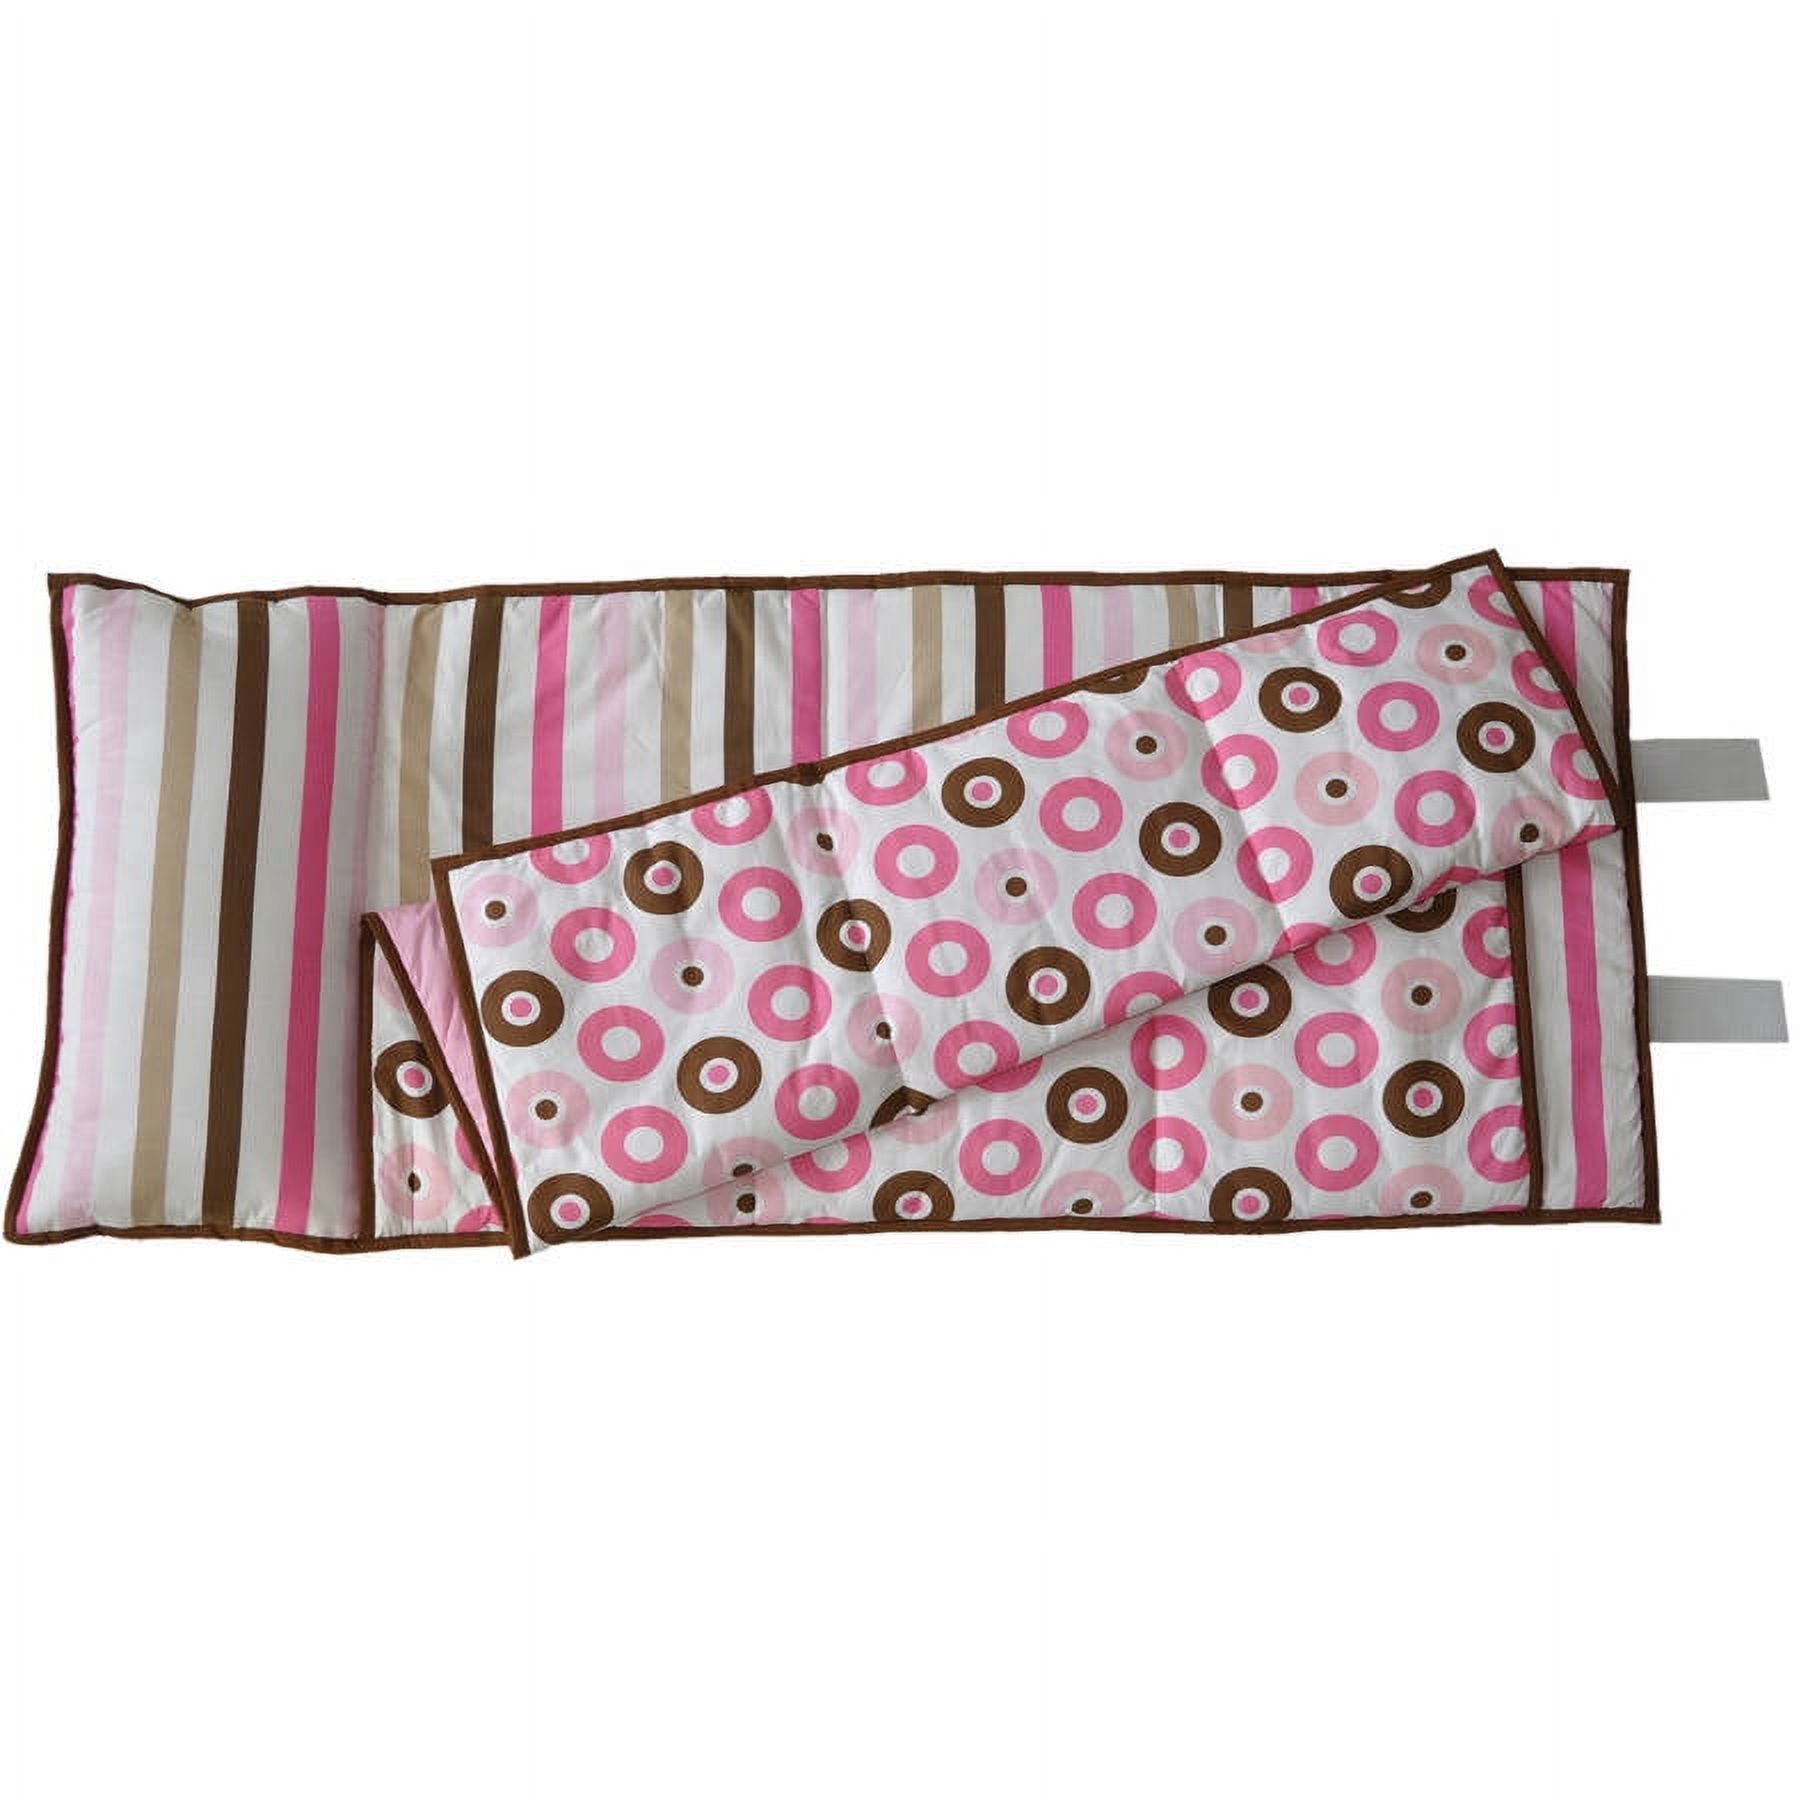 Bacati - Mod Dots/StripesToddler Nap Mat in Pink, 100% Cotton Percale with attached pillow, size 20 x 50 inches - image 1 of 5